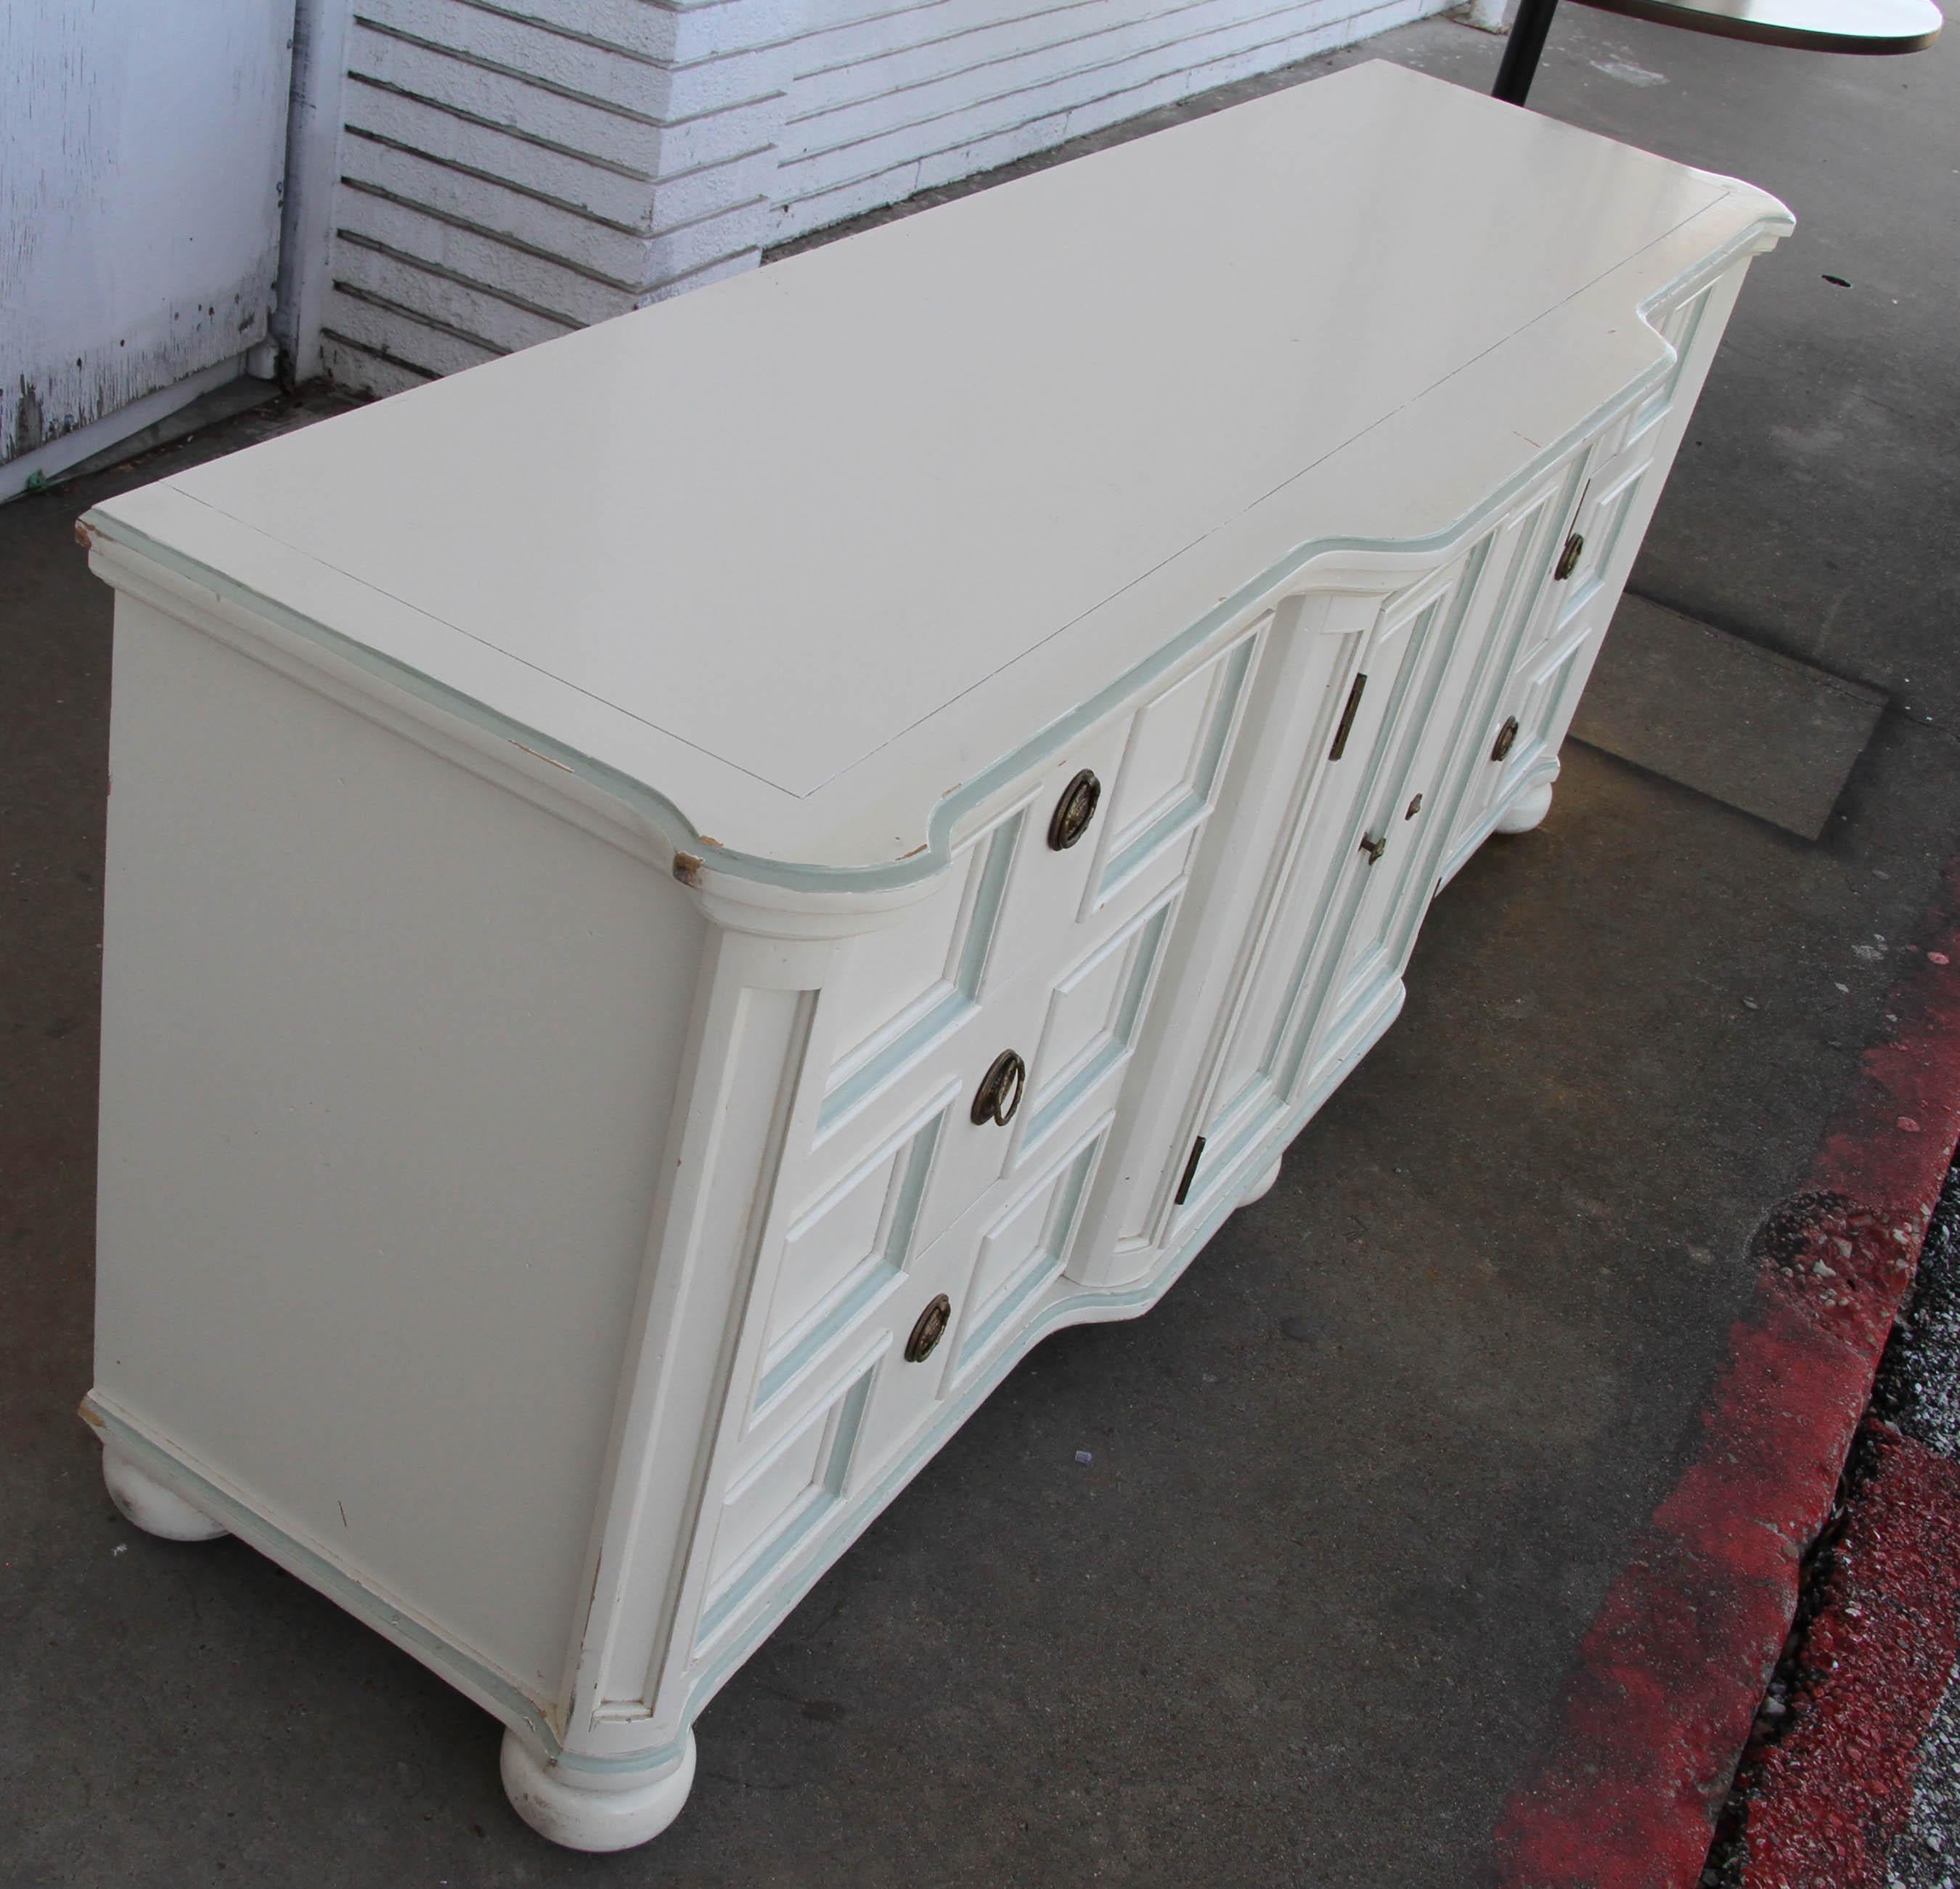 Chelsea Club Sloane Dresser by Century Furniture


Beautiful white chest of drawers in alabaster white with original brass hardware. Nine drawers with His and Hers jewelry trays. 

W: 67.50 in D: 21 in H: 42.25 in 75